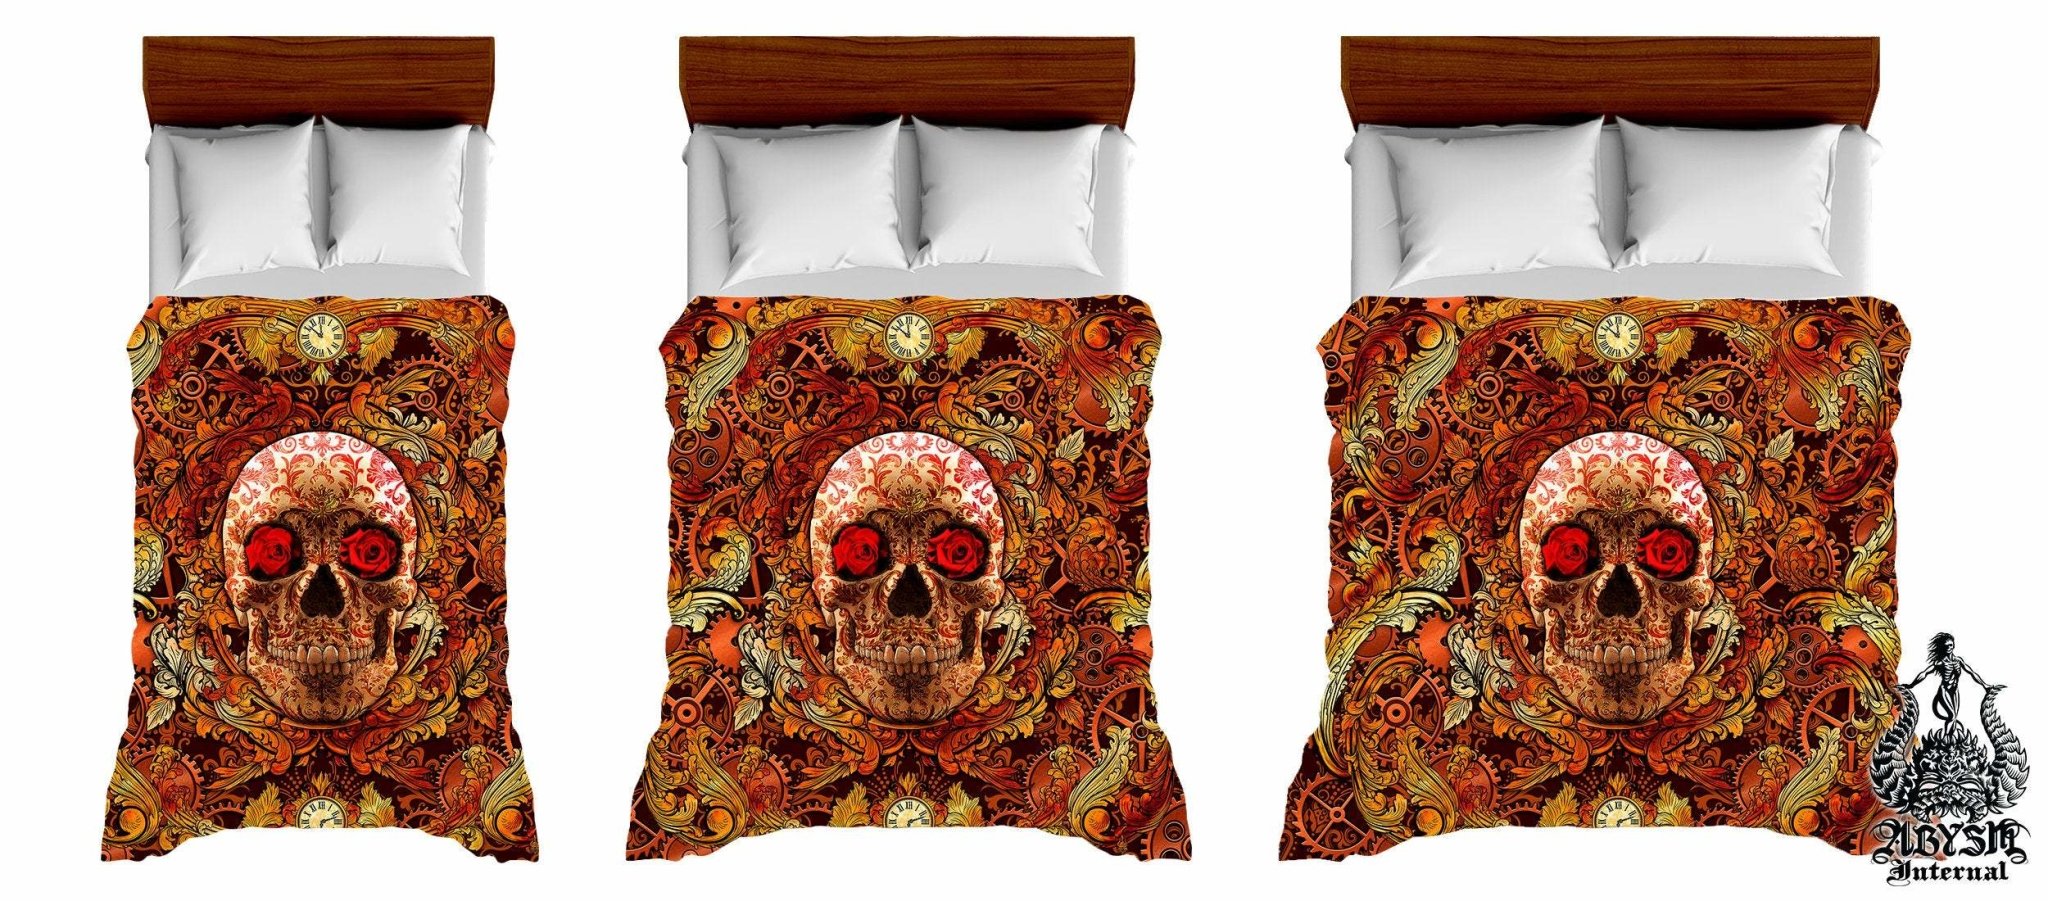 Steampunk Bedding Set, Comforter and Duvet, Victorian Goth Bed Cover and Bedroom Decor, King, Queen and Twin Size - Skull - Abysm Internal